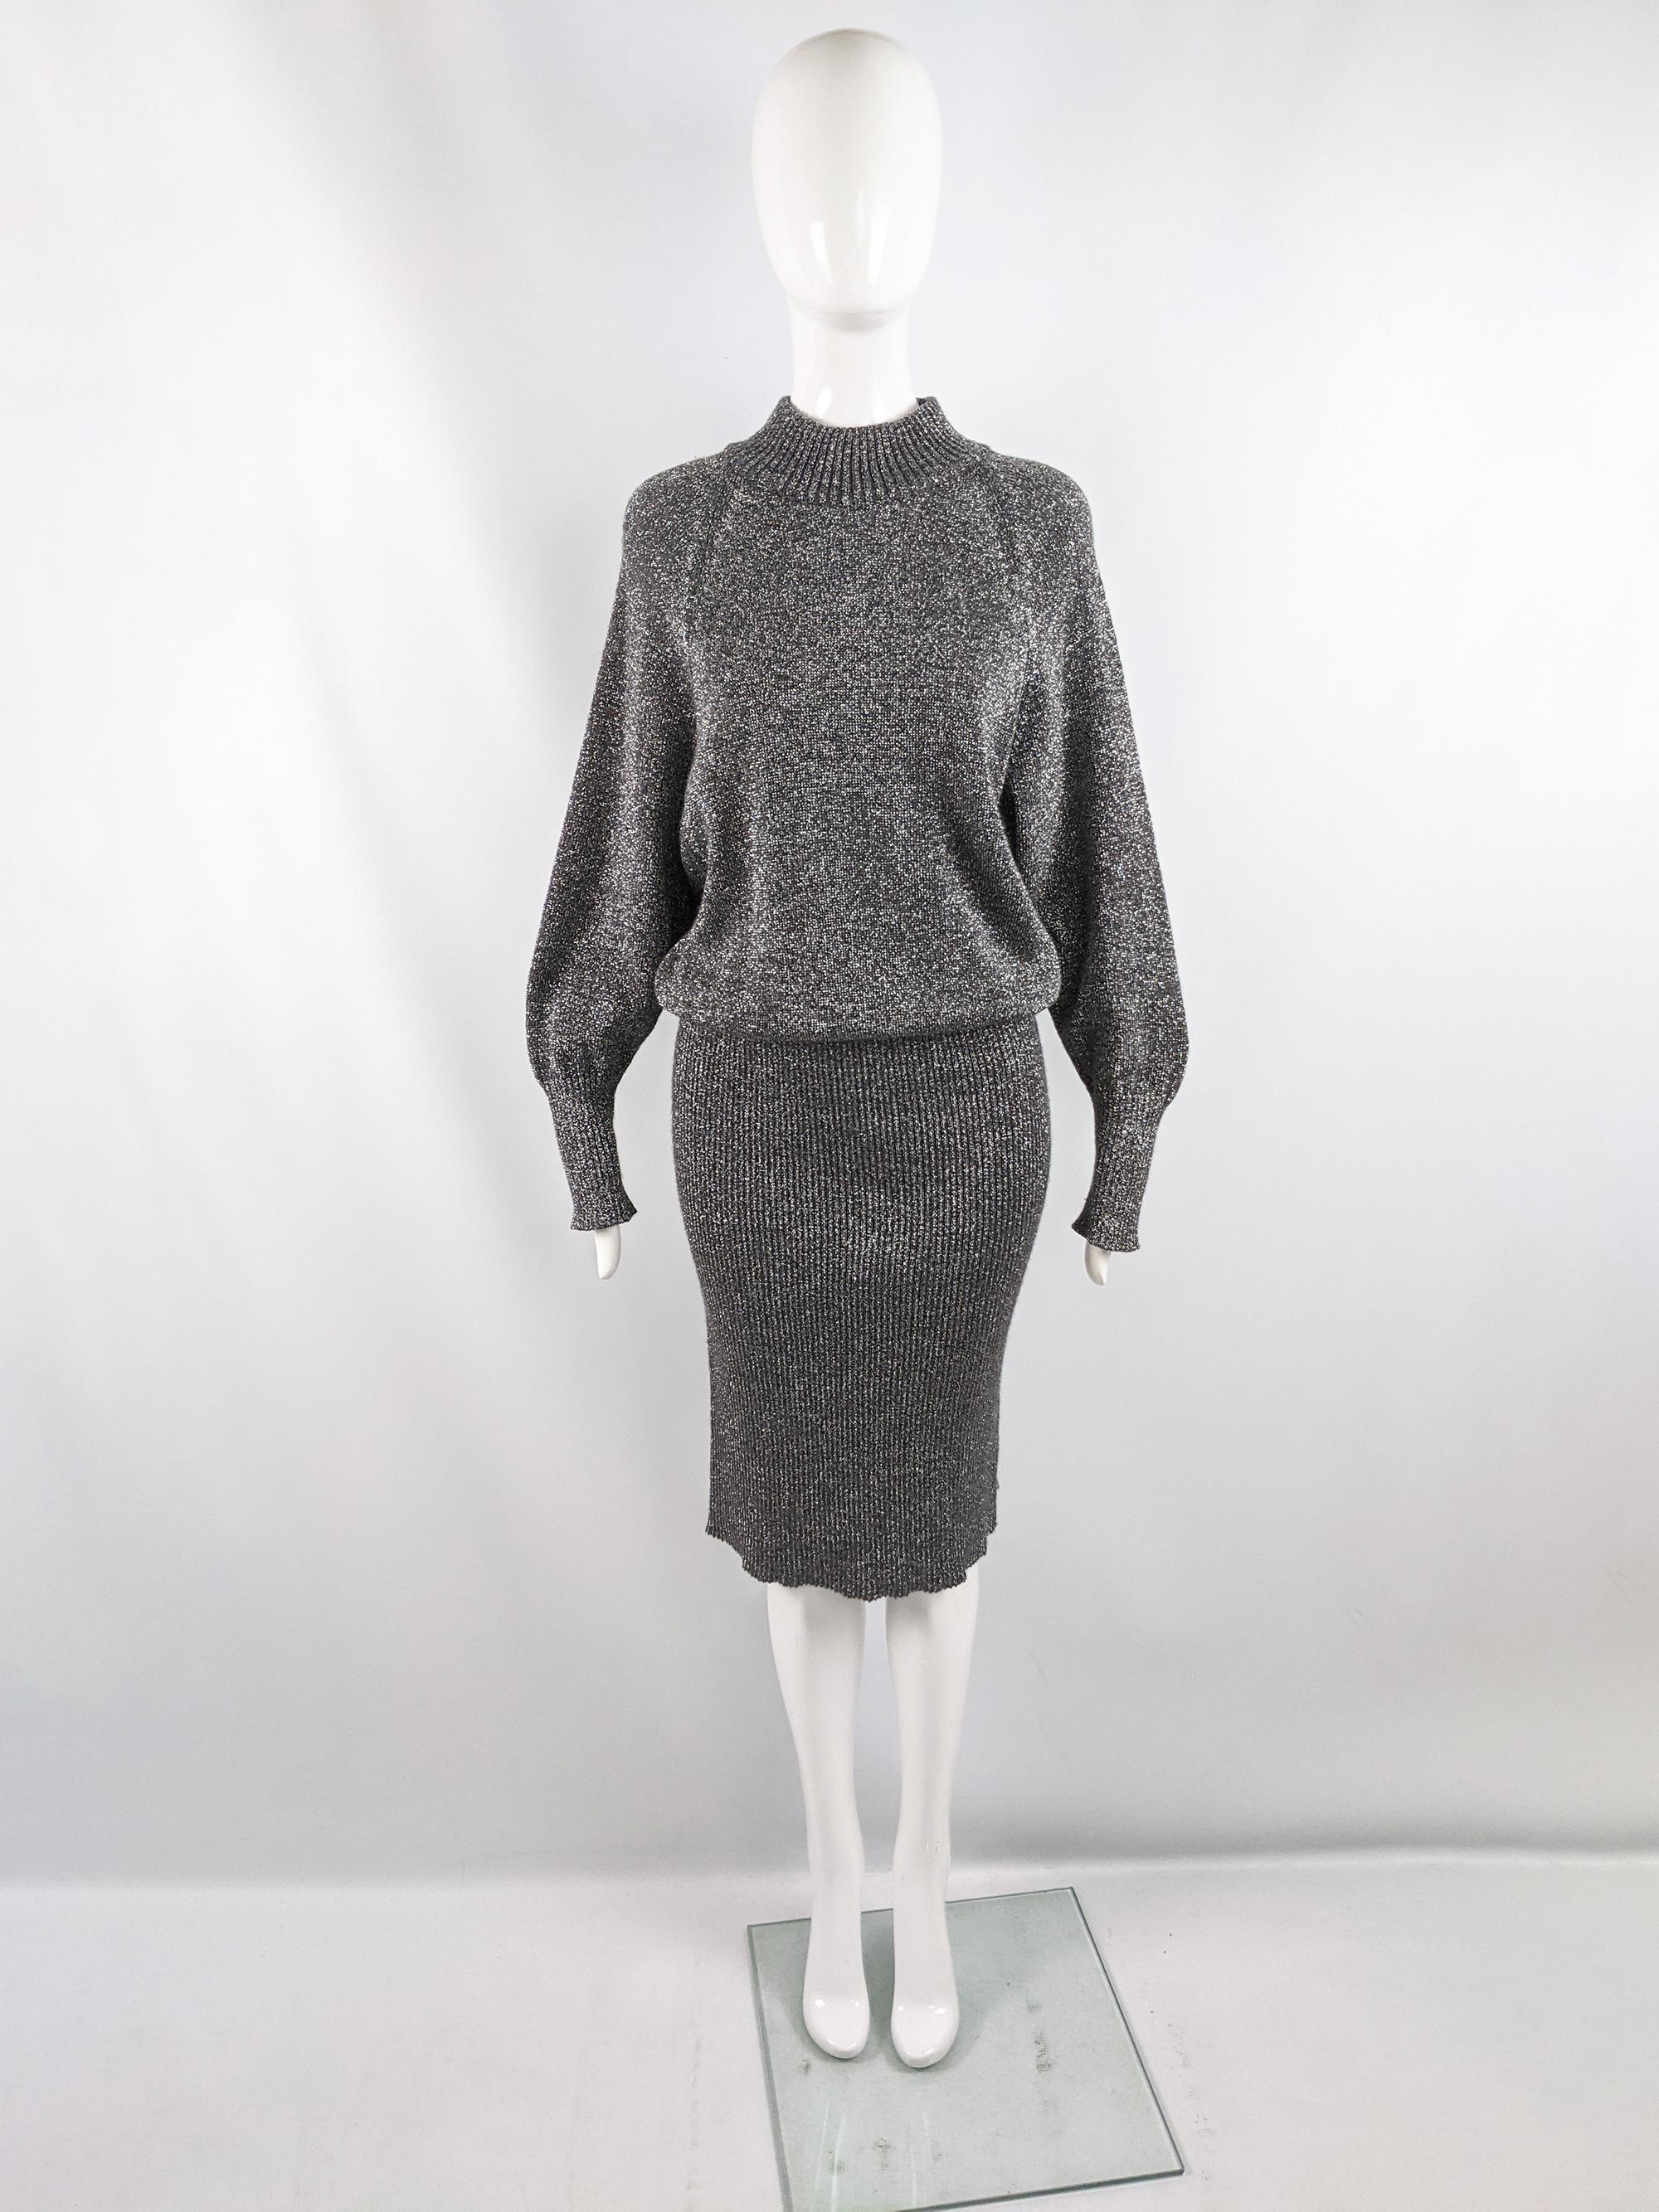 A fabulous vintage womens long sleeve sweater dress from the 80s by luxury Italian fashion house, Max Mara for their Marella line. Made in Italy, from a metallic silver wool and lurex knit fabric with a mock neck, ribbed fitted pencil skirt and